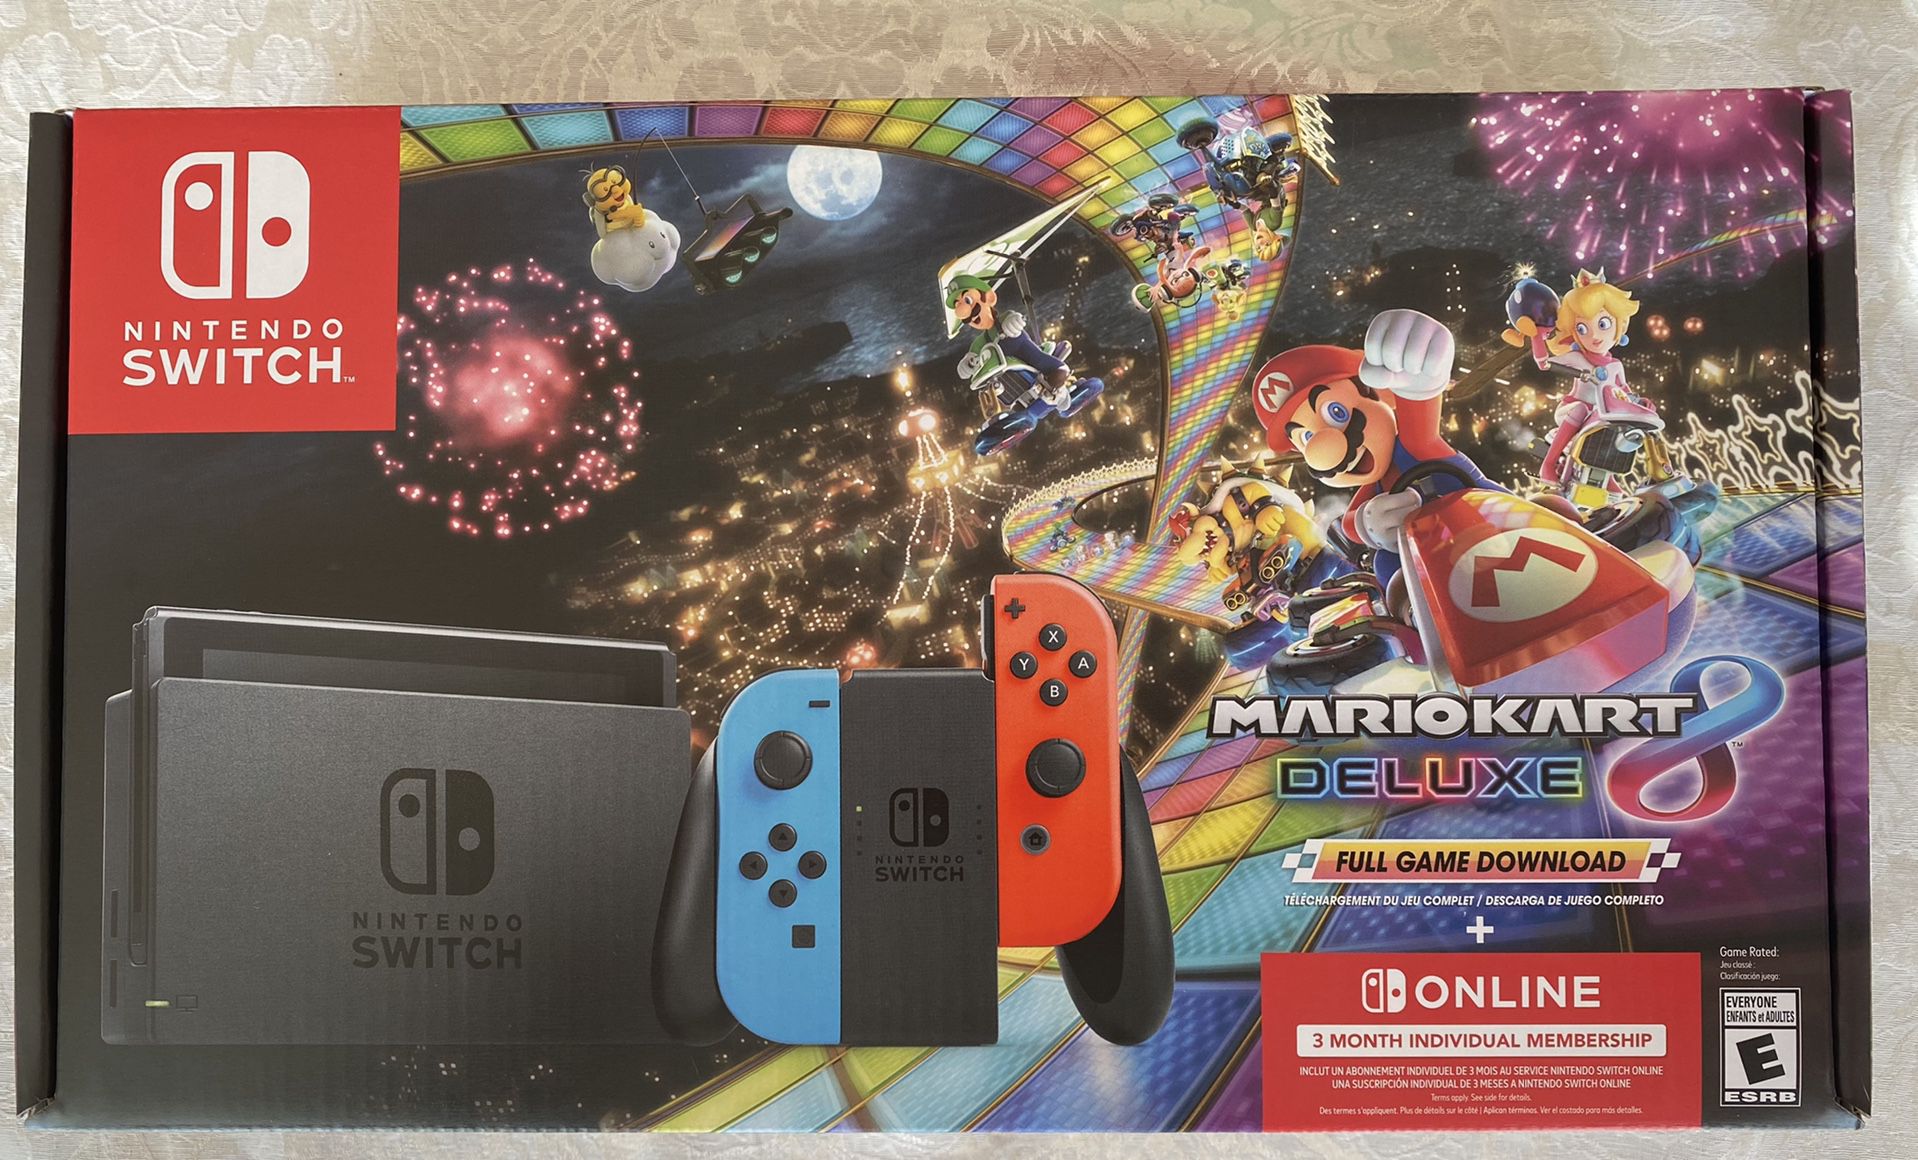 New Nintendo Switch with Neon Joy-Con, Mario Kart 8 Deluxe, and Nintendo Online 3 Month System Bundle. .